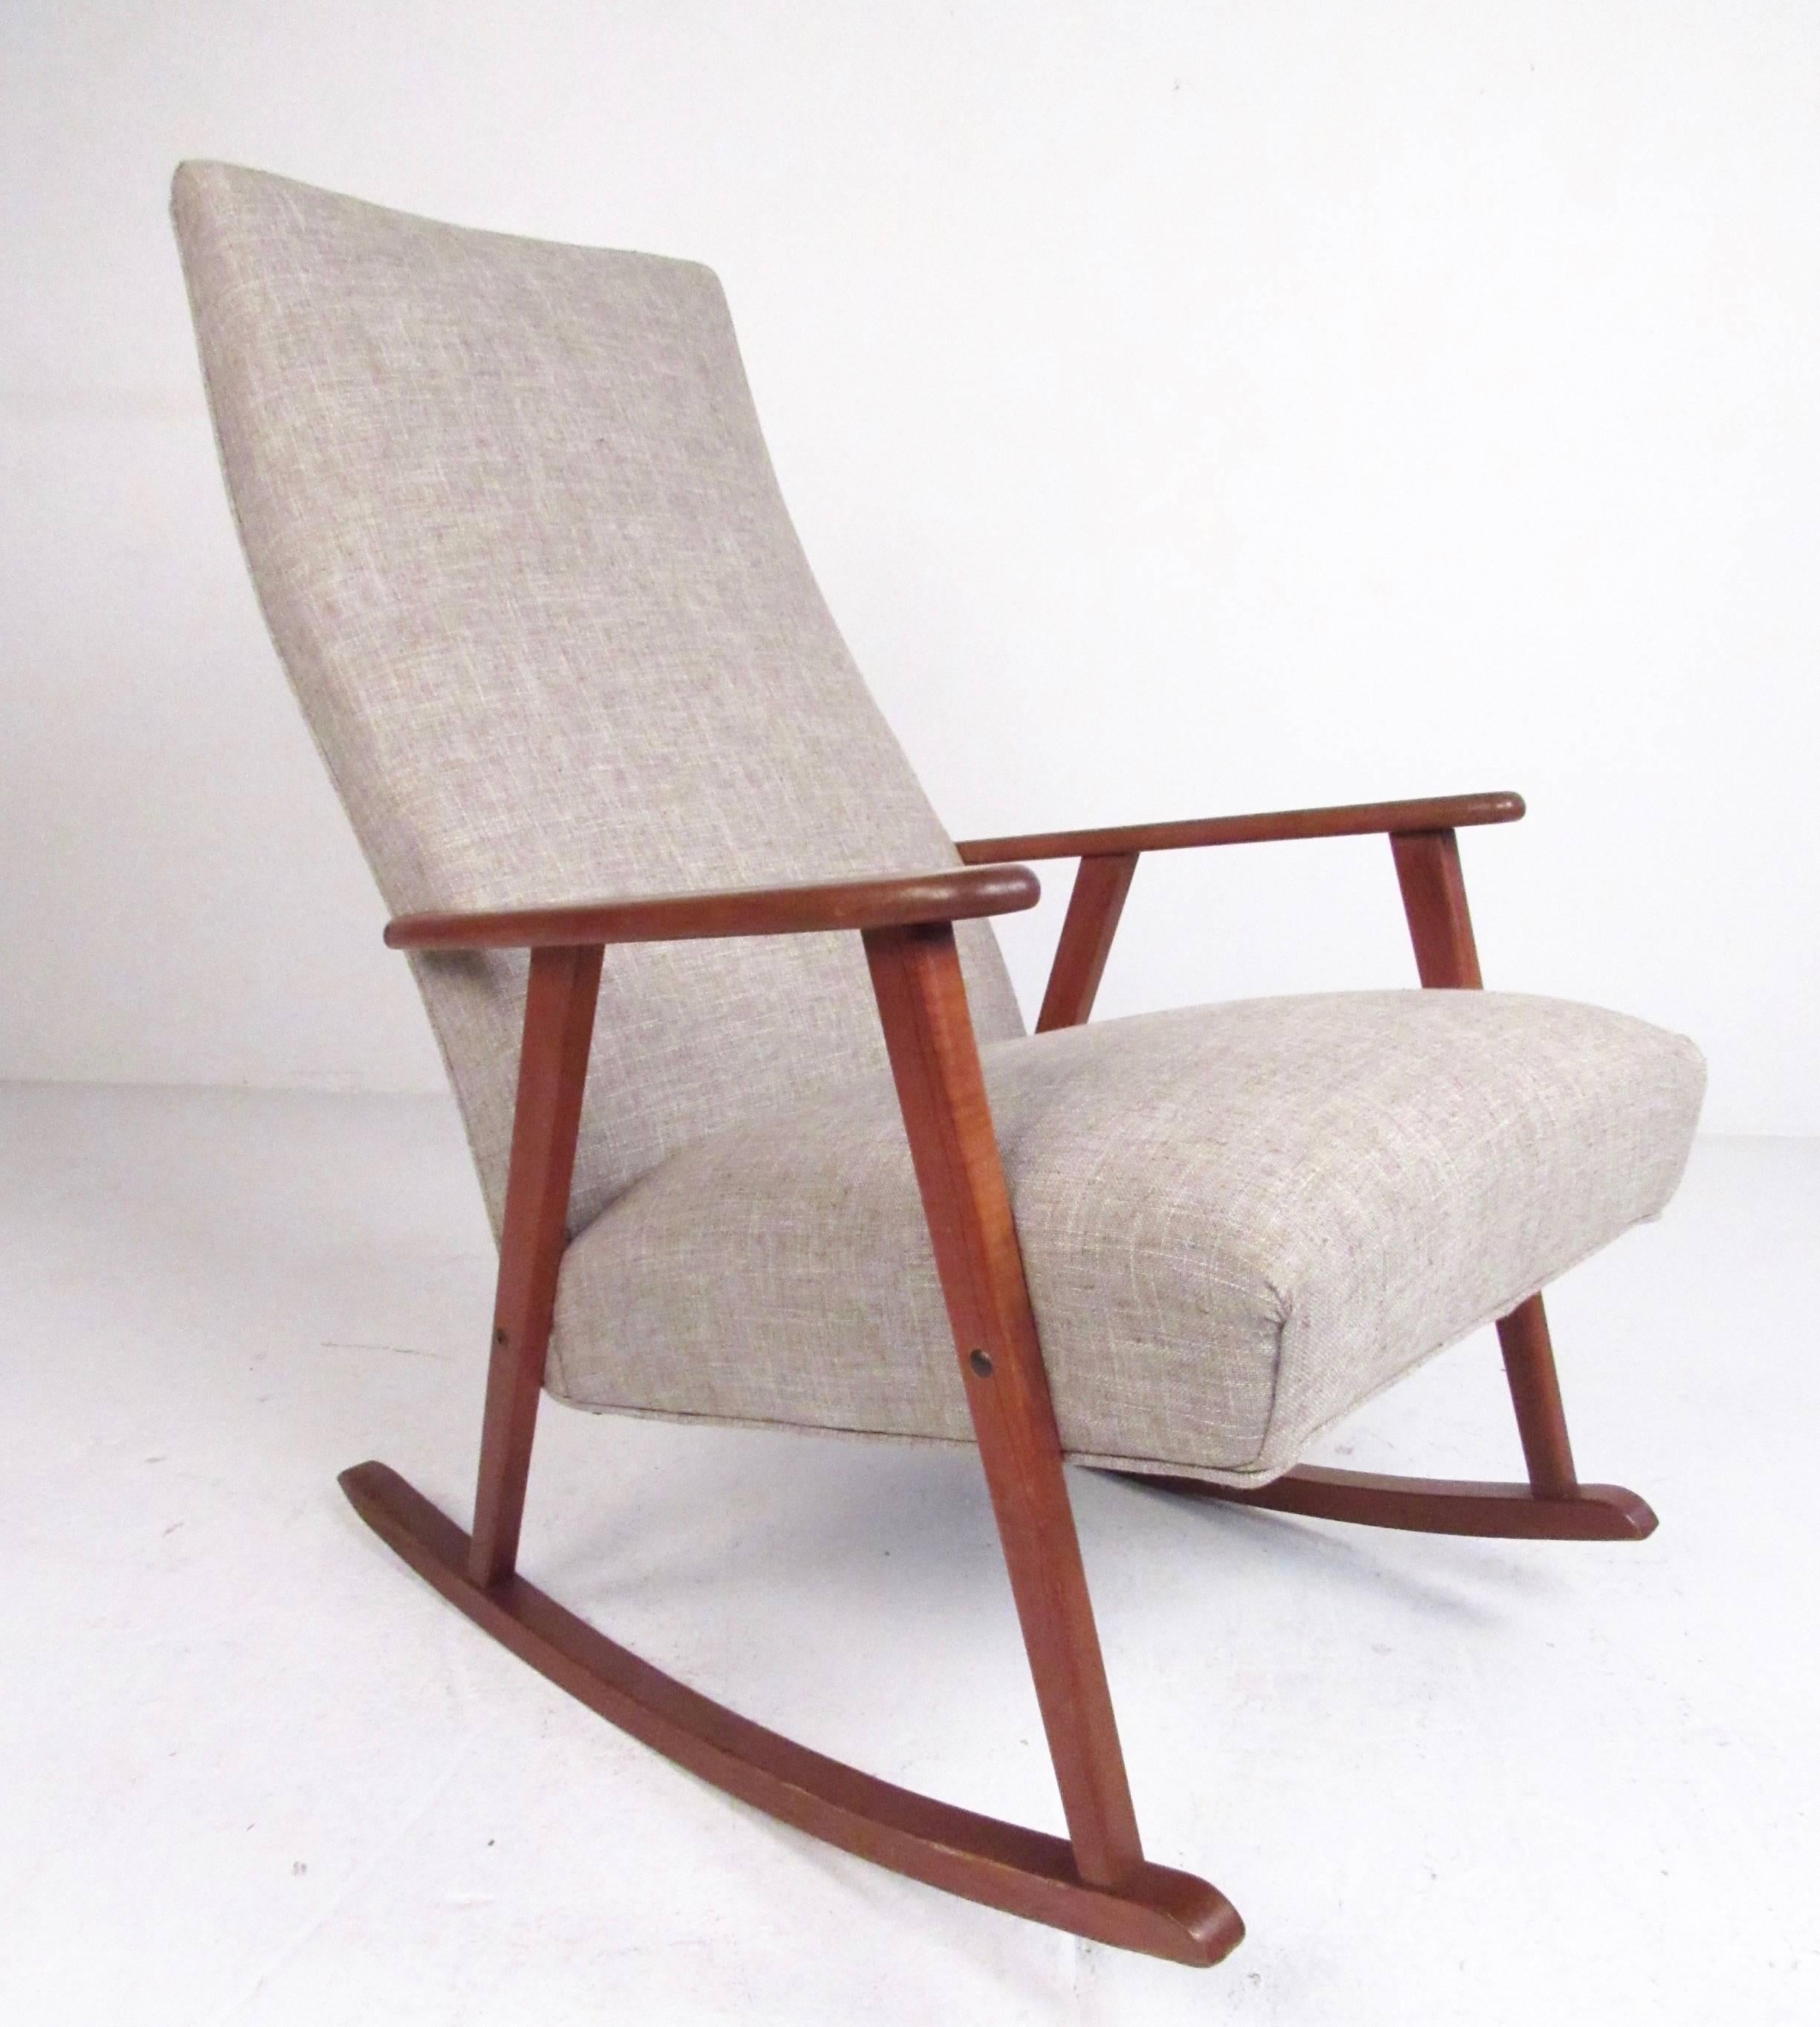 This stylish Scandinavian Modern rocking chair features a well-crafted teak frame and upholstered high back seat. Simple elegance combines mid-century design with timeless comfort, making this the perfect rocker for any setting. Please confirm item